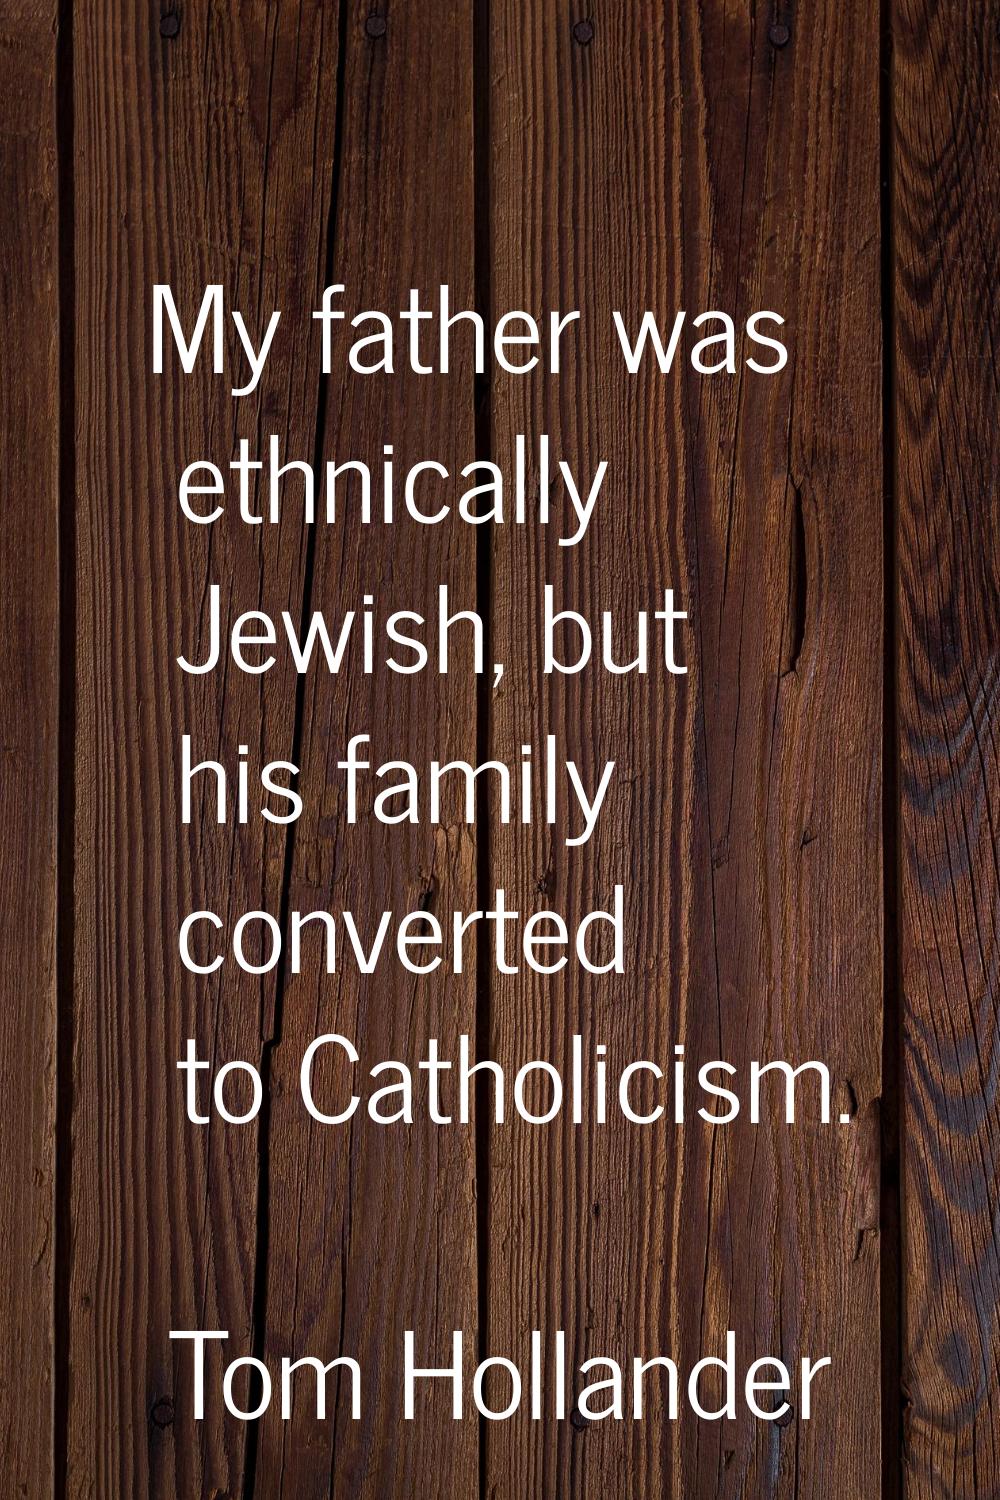 My father was ethnically Jewish, but his family converted to Catholicism.